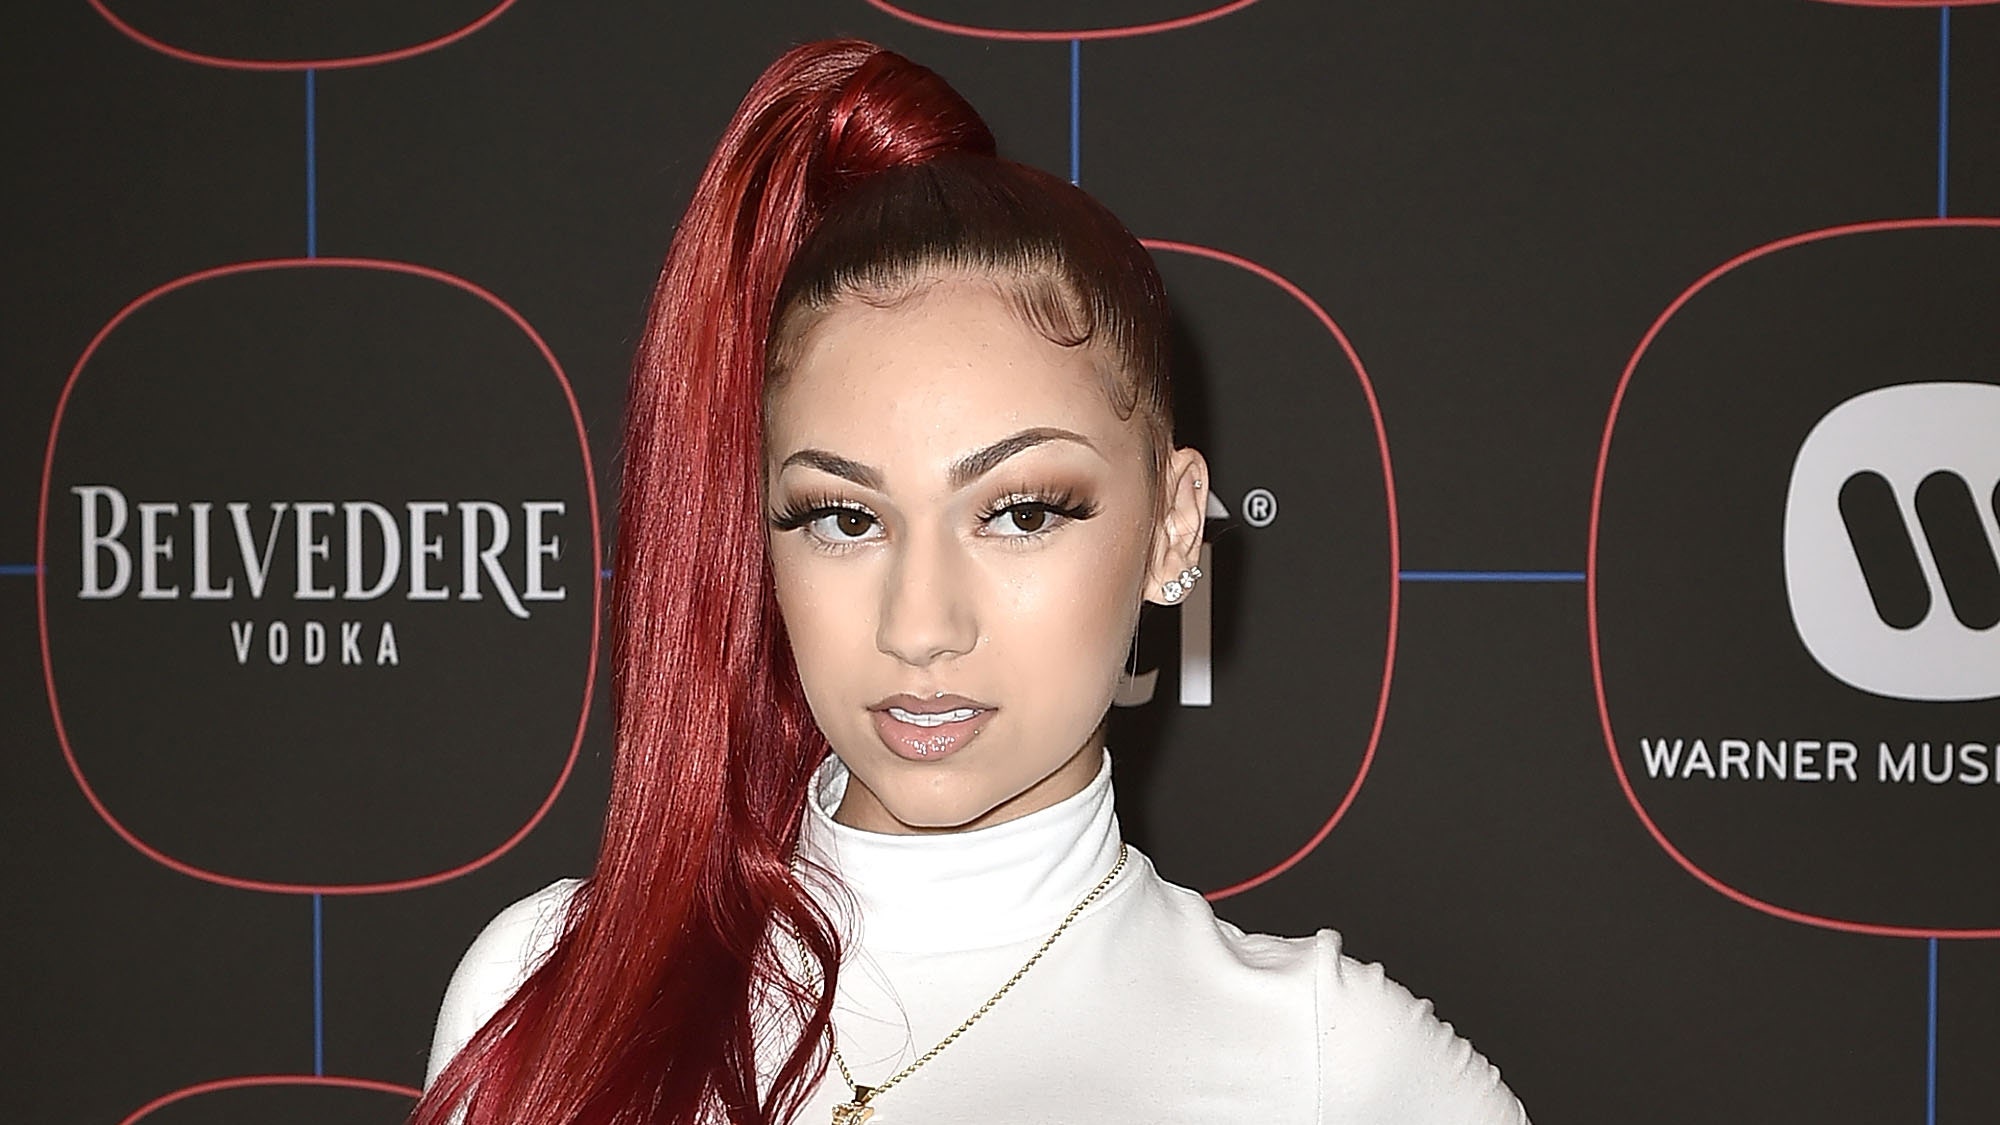 Bhad Bhabie calls Dr. Phil, alleges abuse in the treatment field she was sent to after appearing on the show